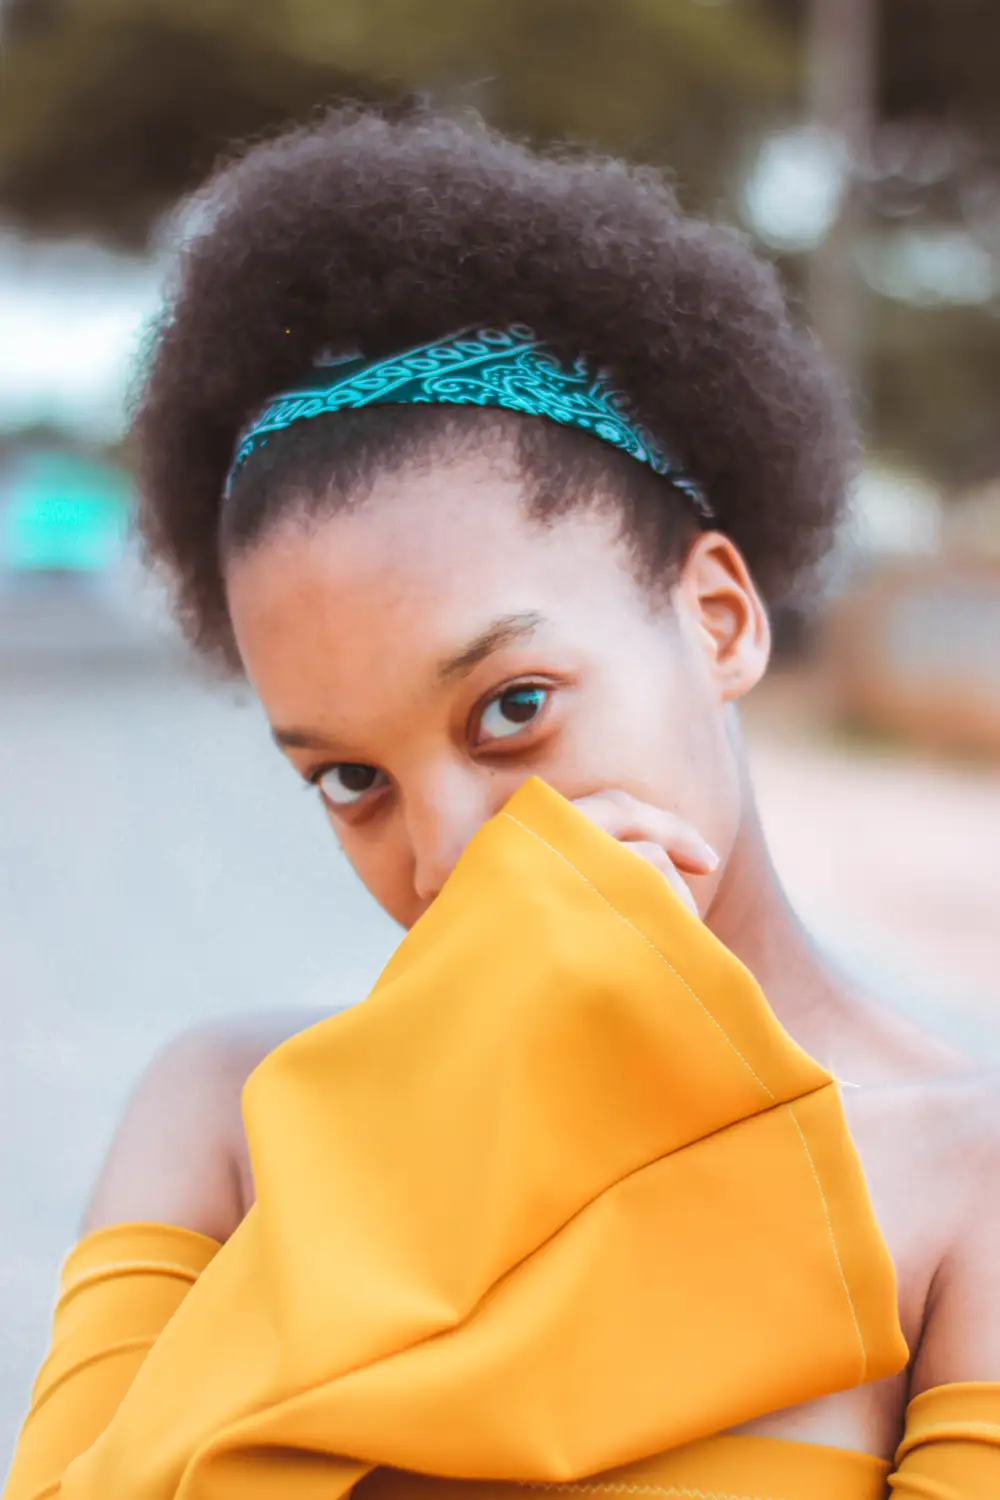 Pretty beige-skin girl with afro hair held by bandana wearing a yellow  dress cover her mouth while giving a fierce look